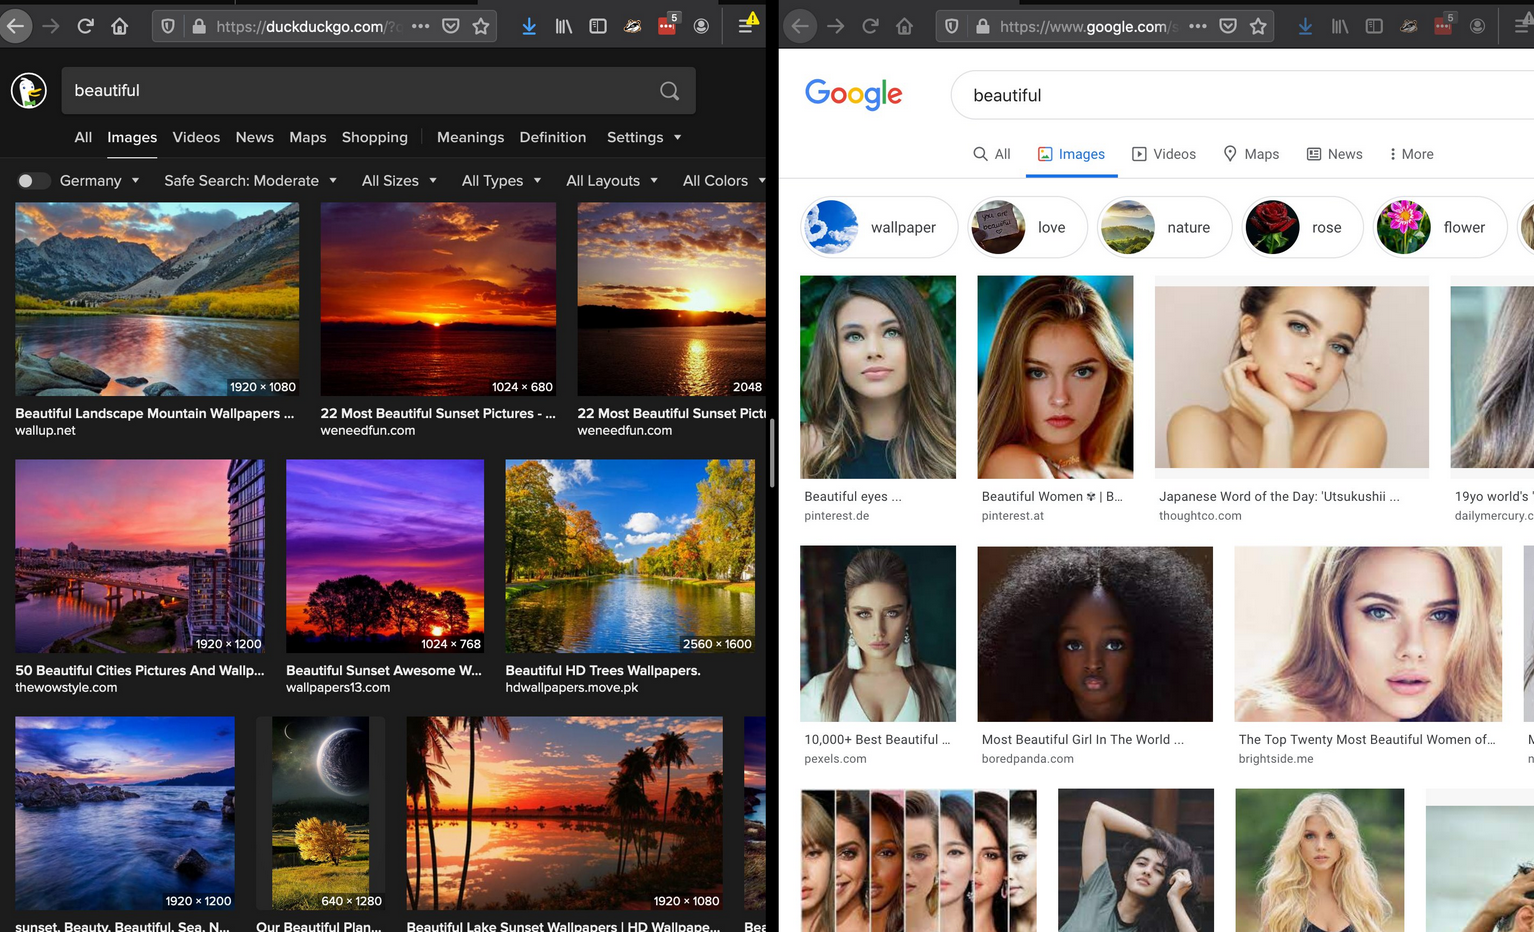 Search results in google and duckduckgo showing women and landscapes for the term beautiful